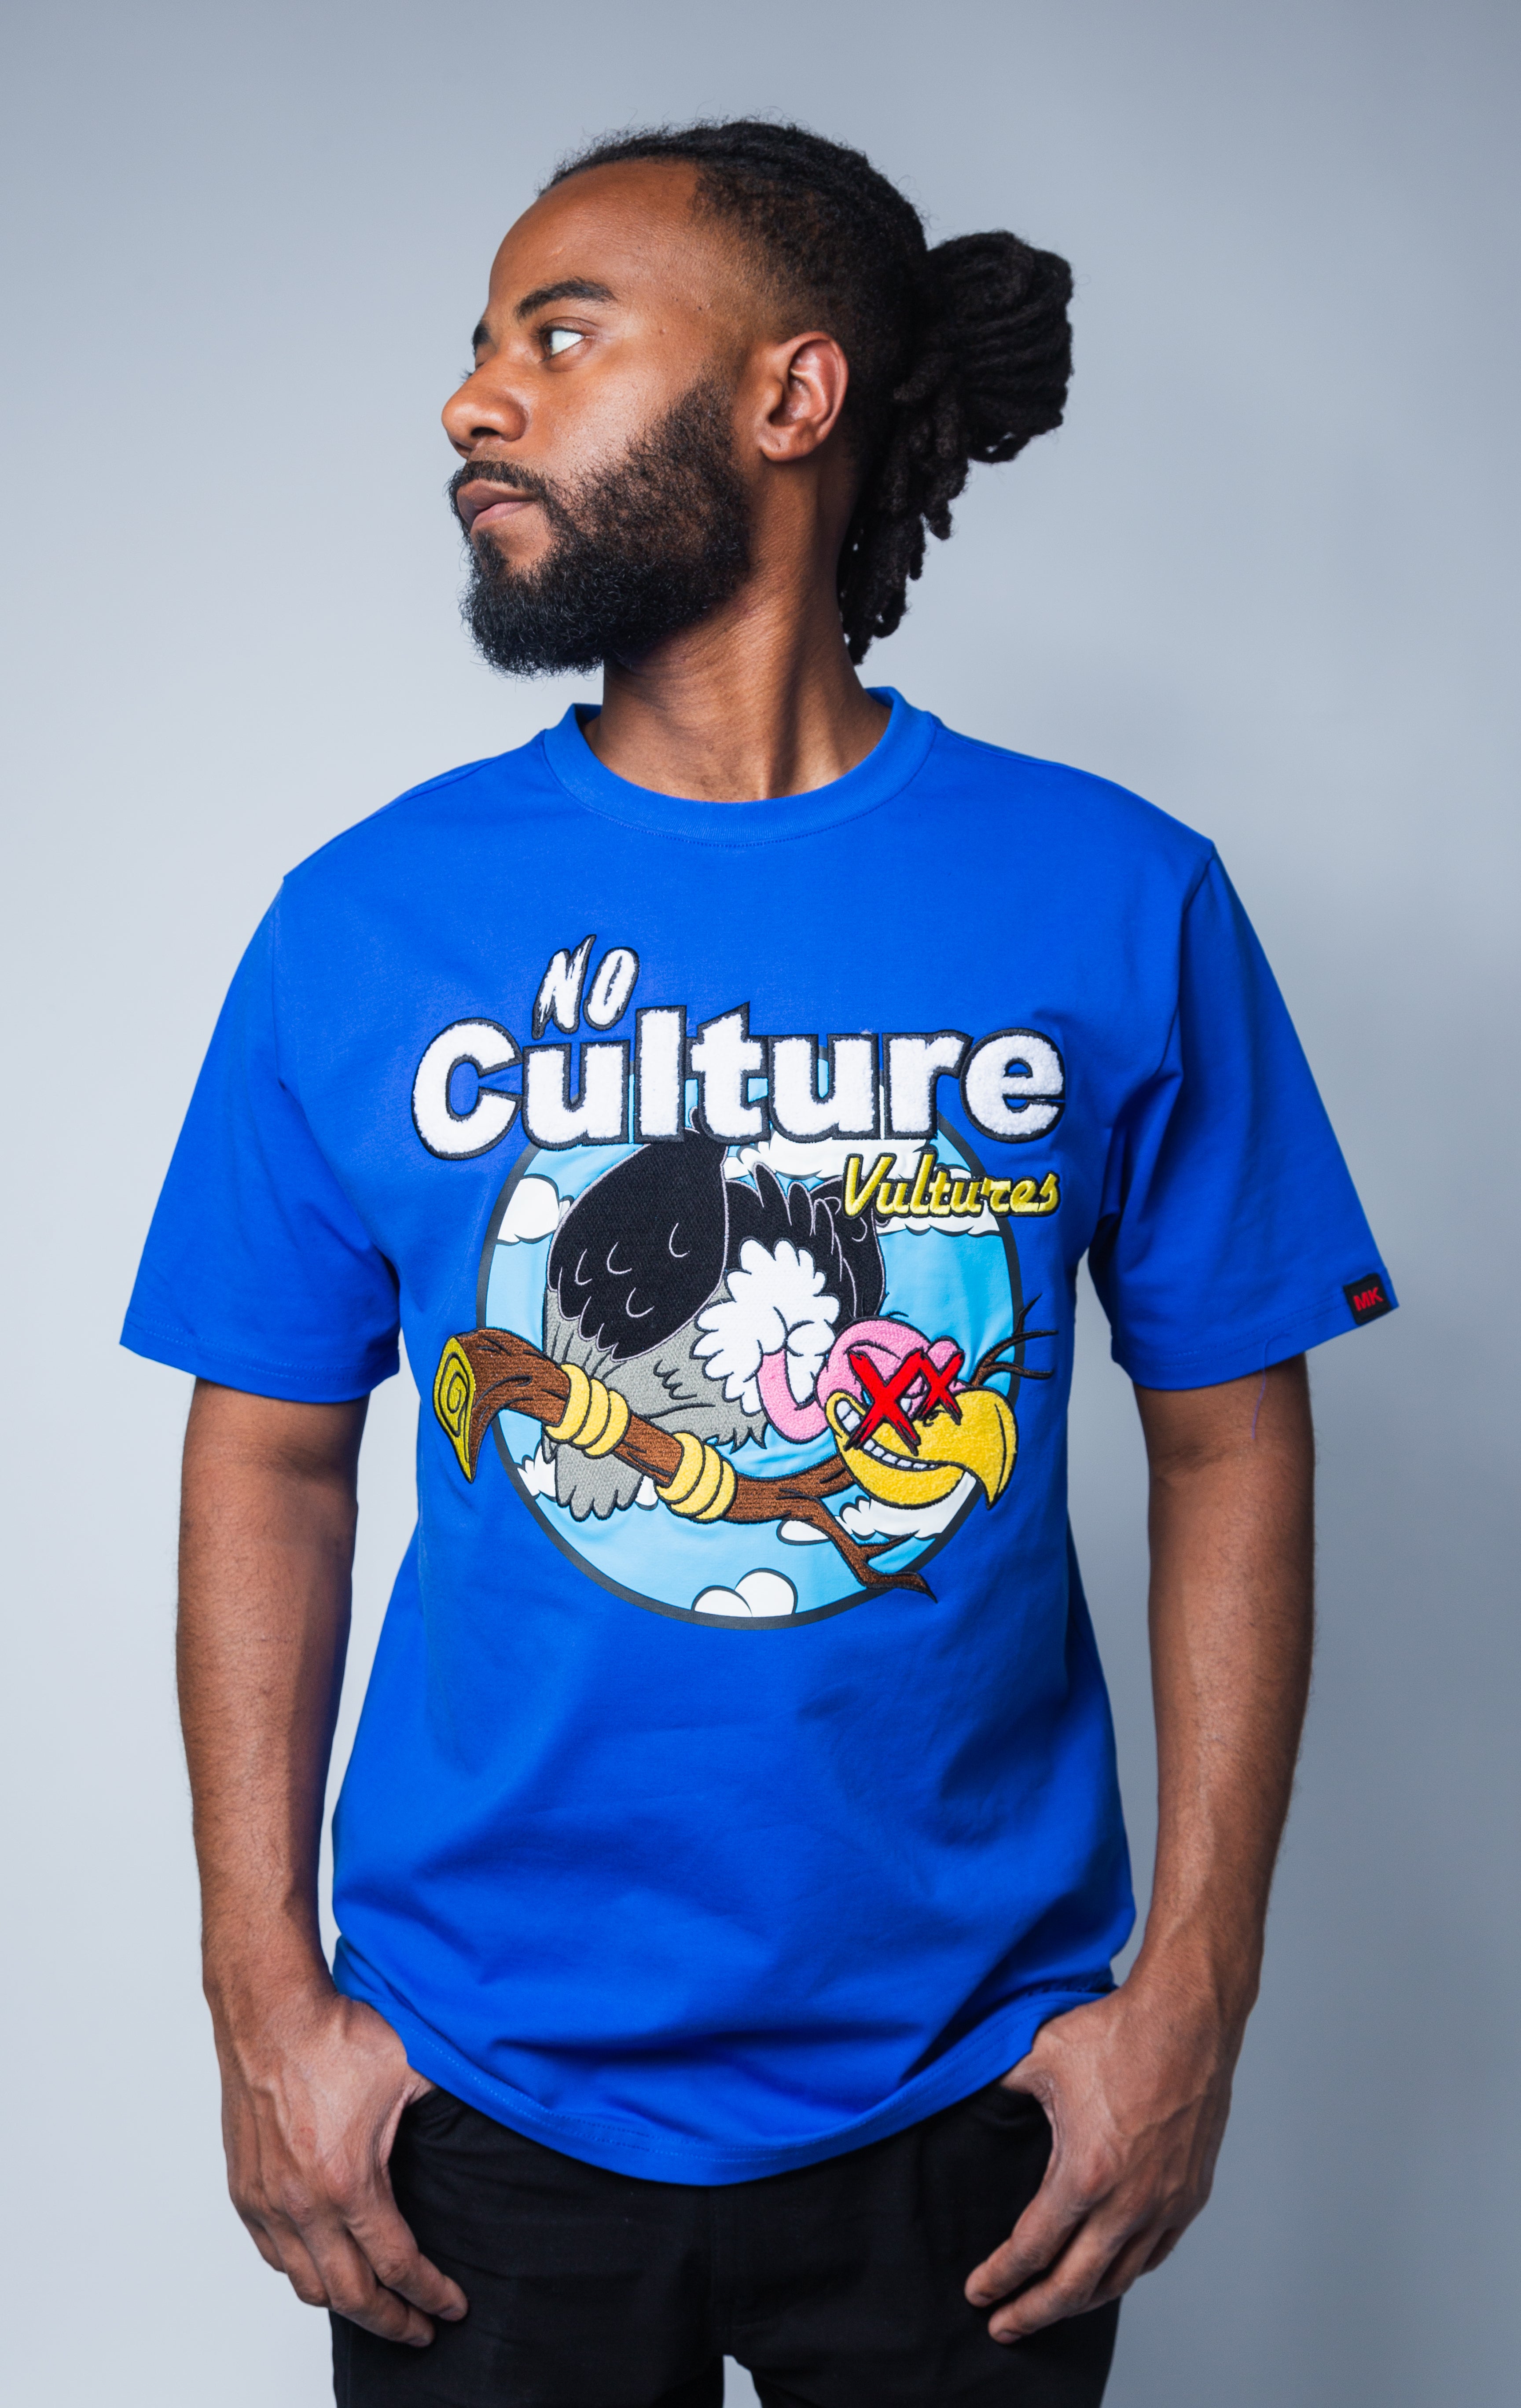 Royal blue t-shirt with No Culture Vulture graphic on front